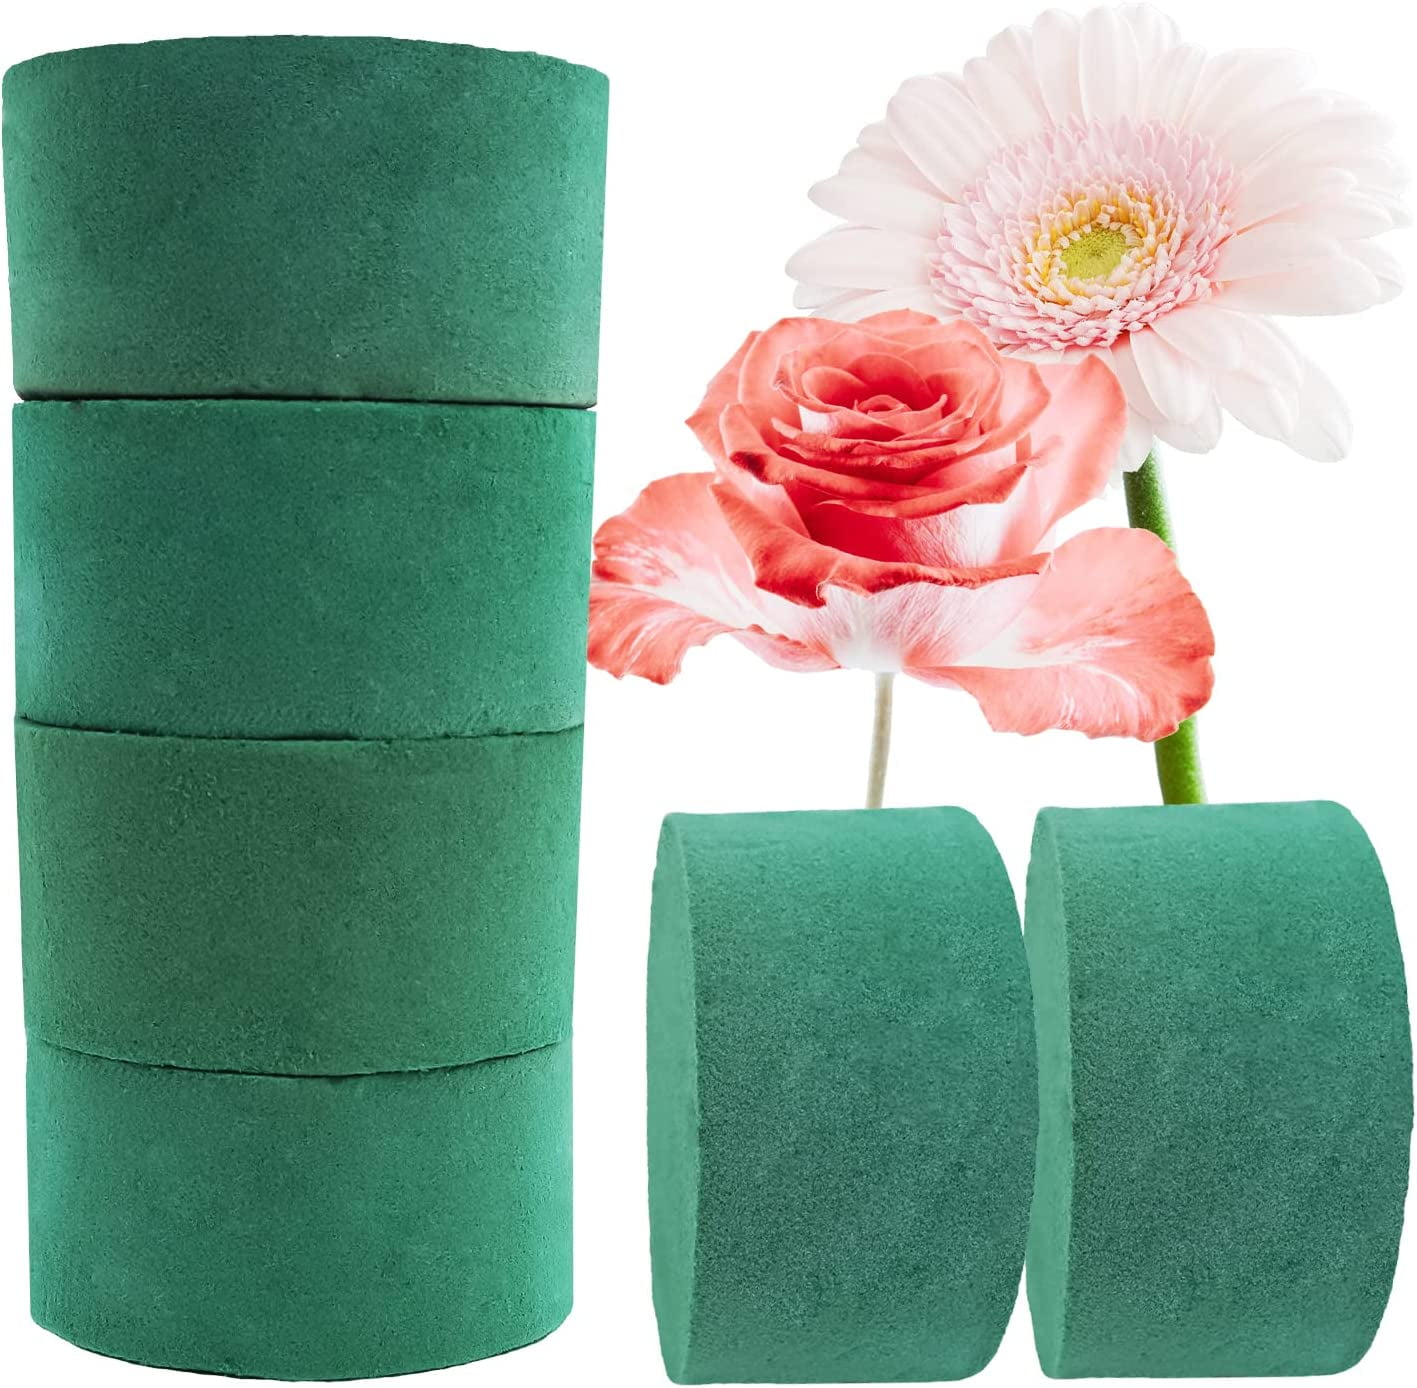 5 Pcs Floral Foam, 4.7 Inch Dry Wet Floral Foam Bricks Round for 4.7 inch